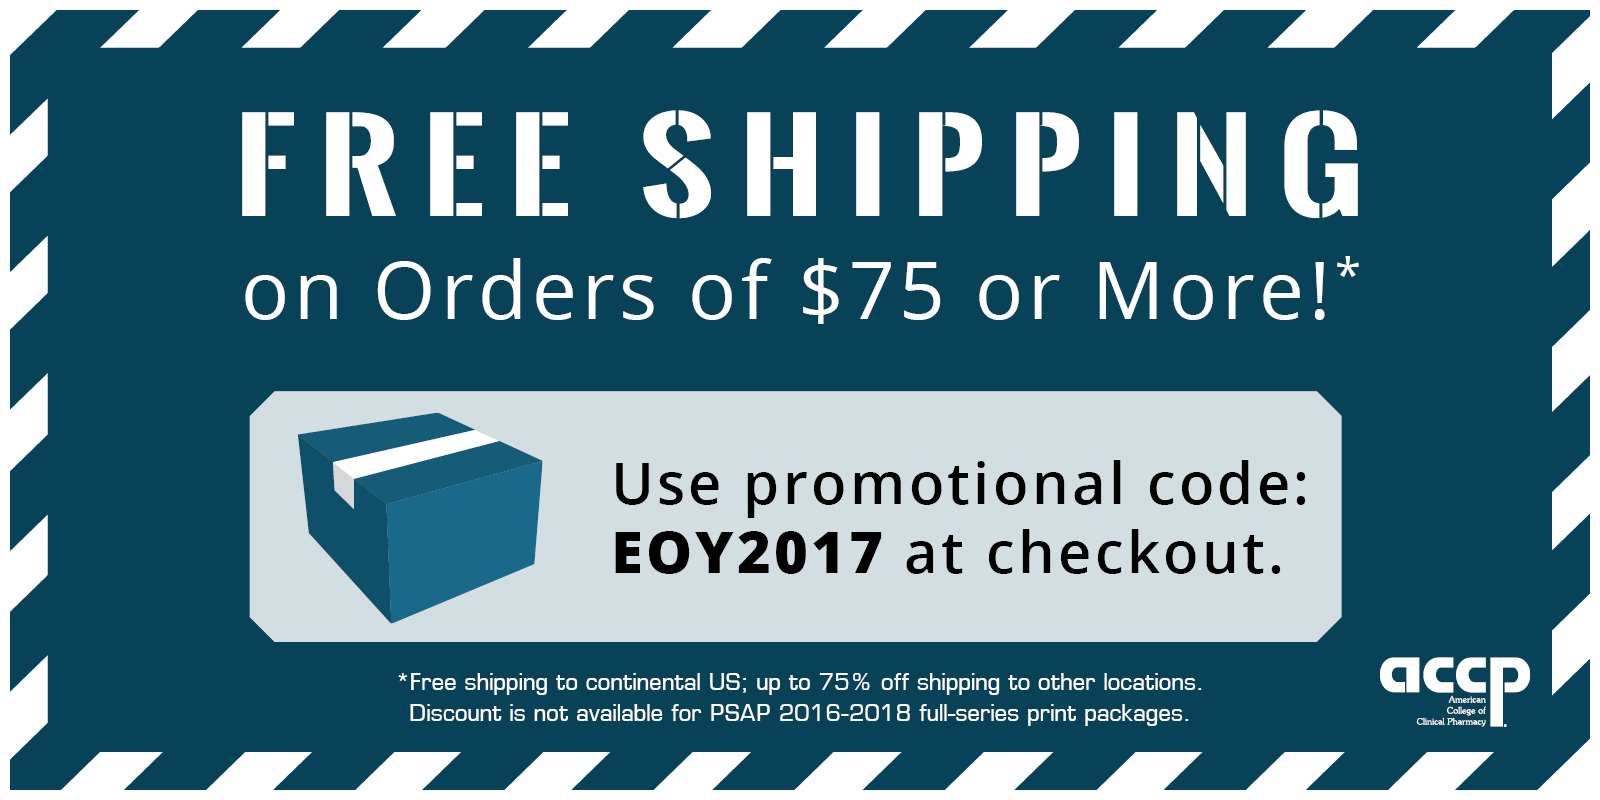 ACCP Bookstore Offers Free Shipping